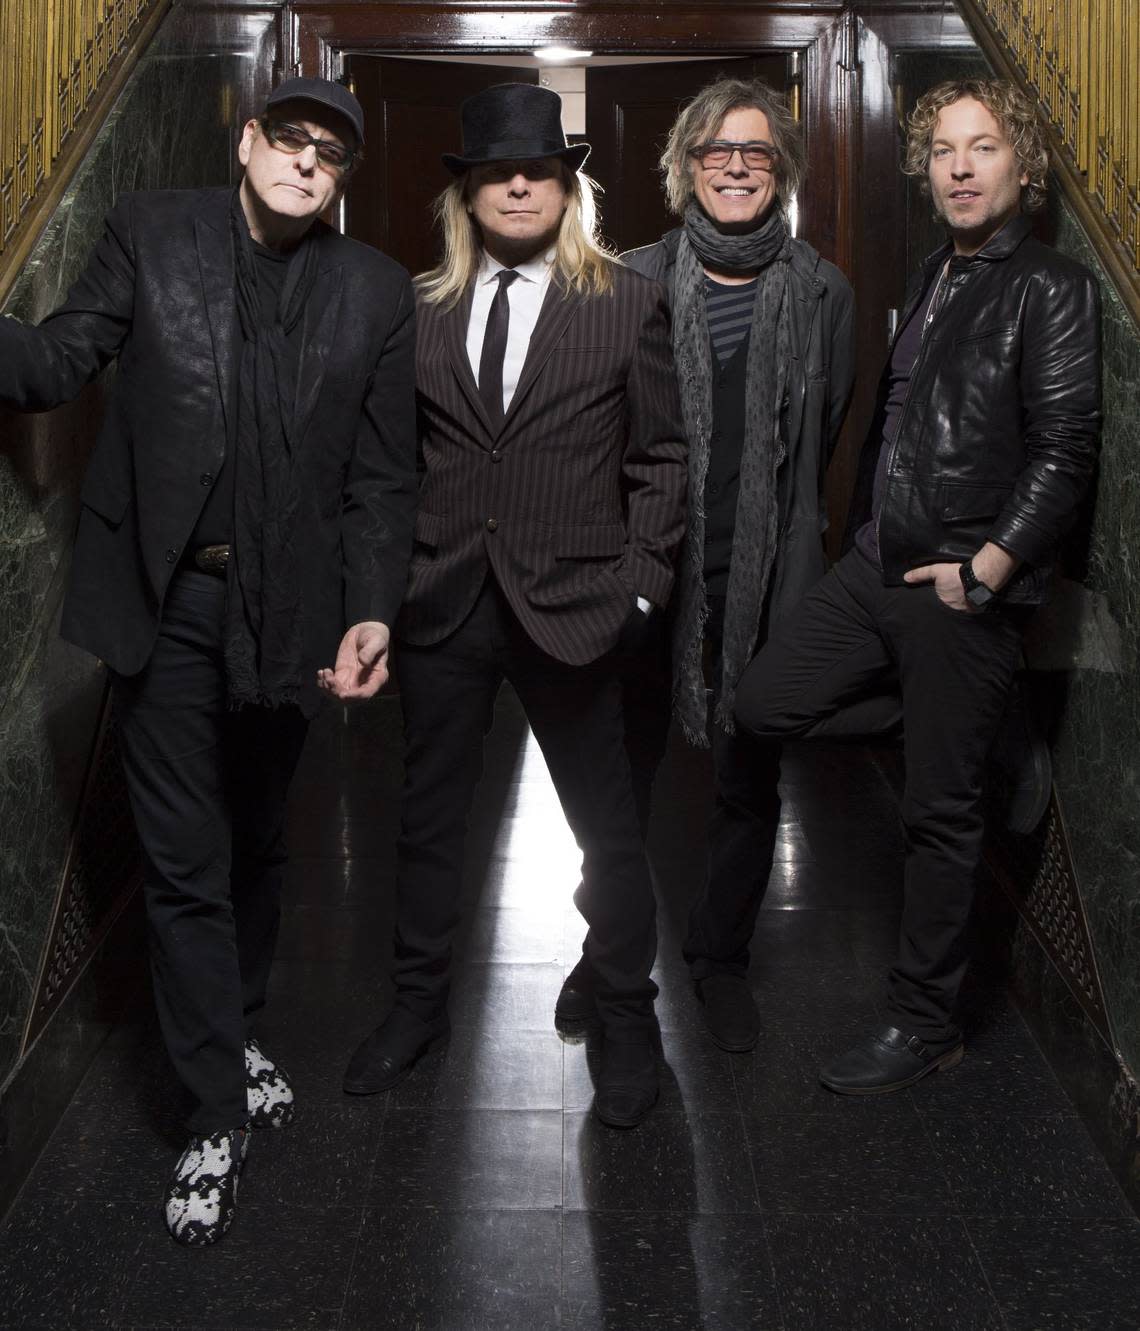 Cheap Trick, known for hits “I Want You to Want Me,” “Dream Police” and “Surrender,” will perform at the Northwest Washington Fair on Aug. 17, 2019.